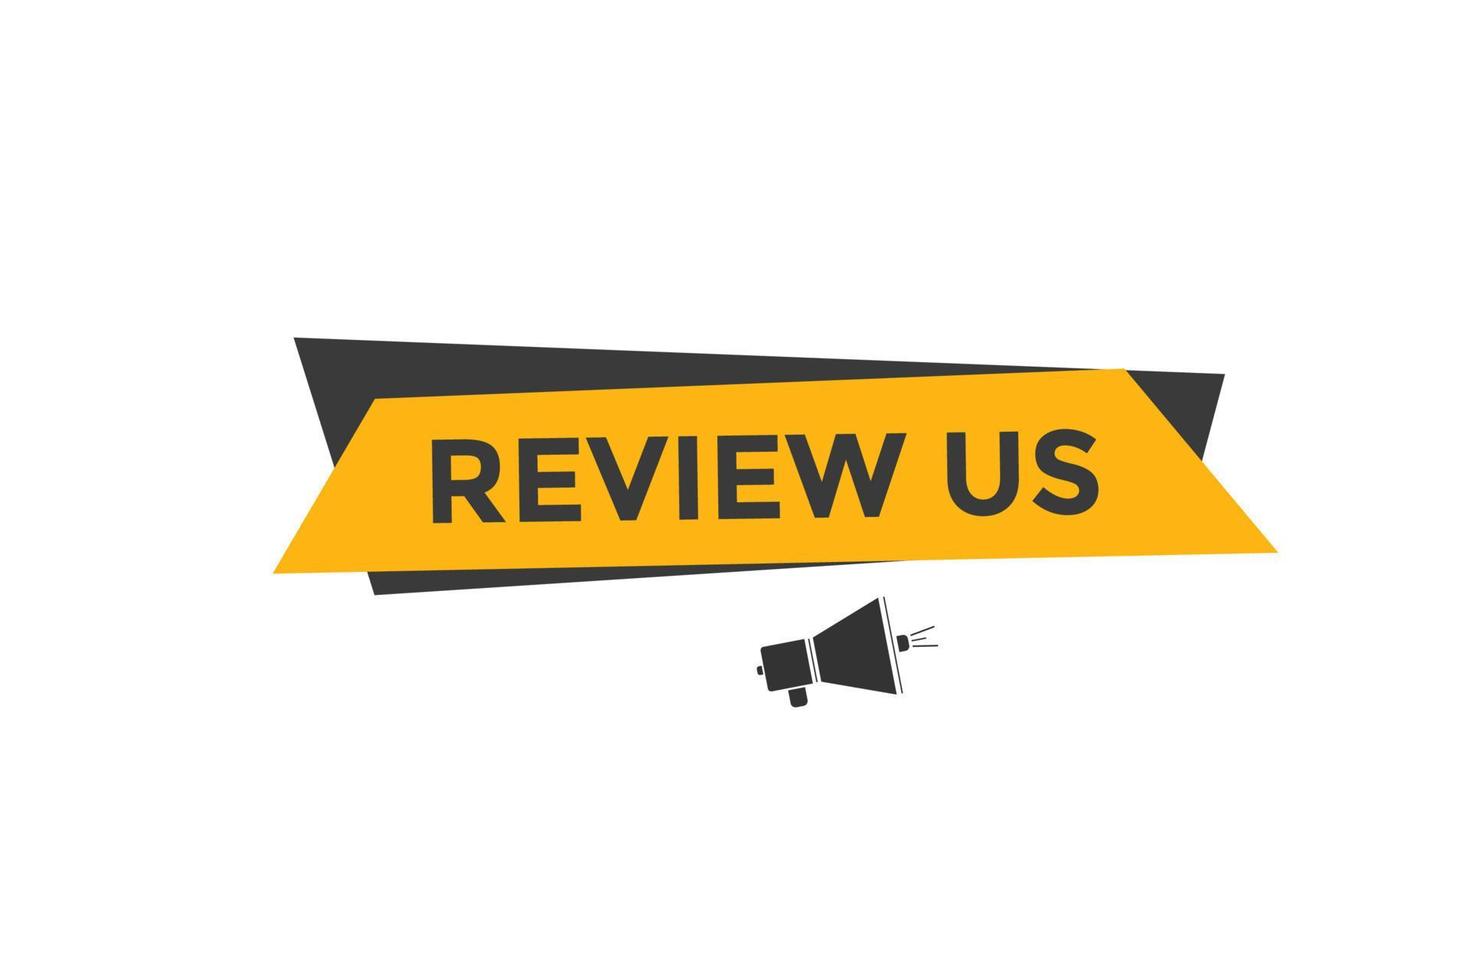 Review us Start now button. Review us User rating social banner promotion. Review Us text social media template vector